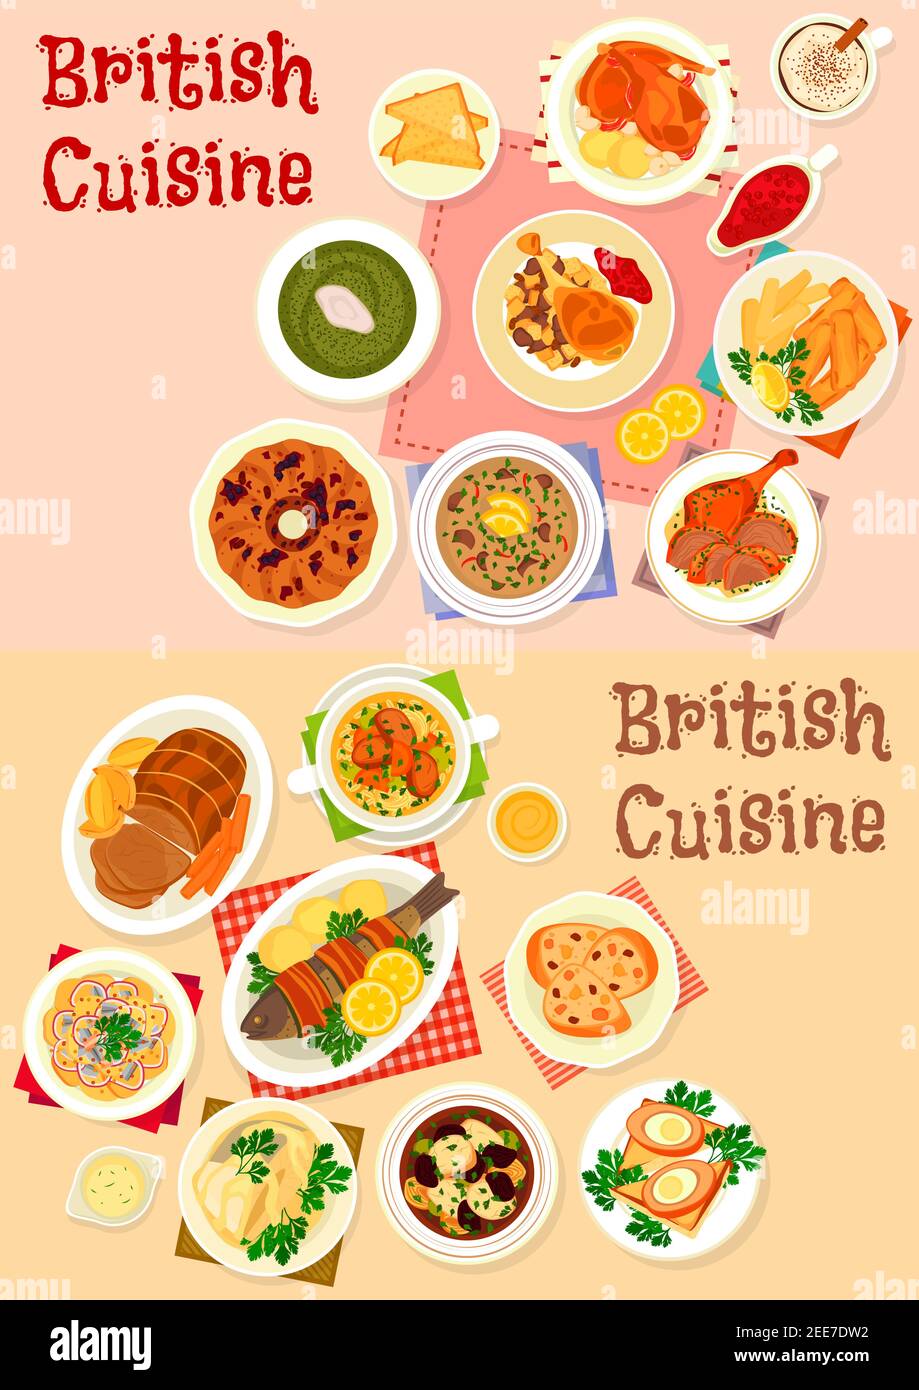 British cuisine lunch icon set of baked meat and fish with bacon, fruit and mint sauce, scotch egg in sausage meat, fish and chip, potato salad, soup Stock Vector